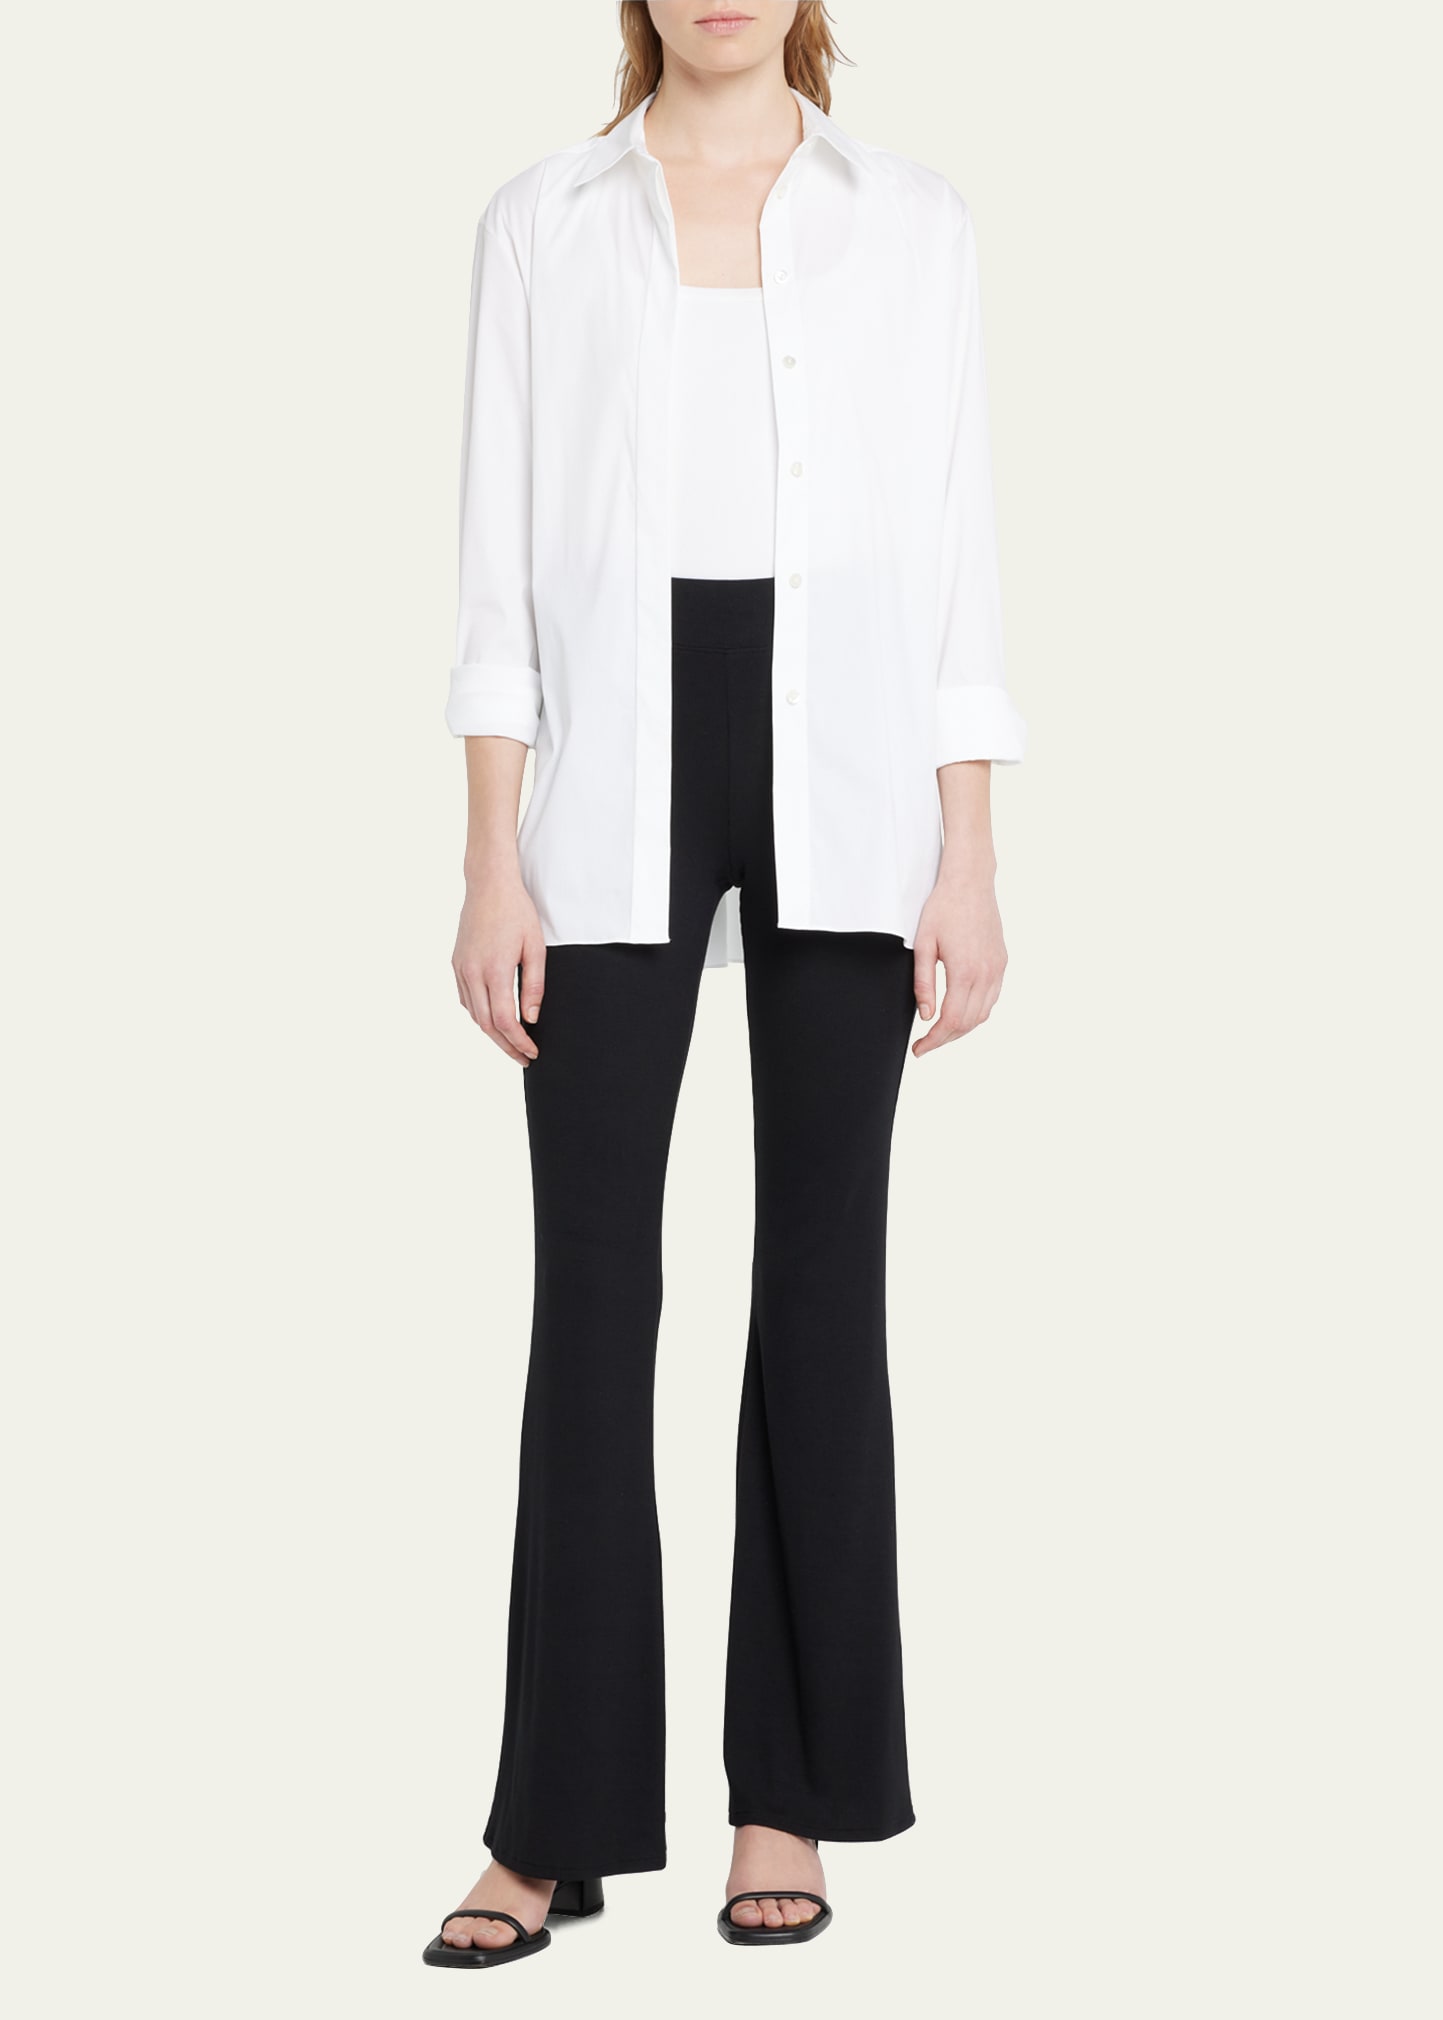 L'Agence Marta High Rise Pull-On Flared Pants